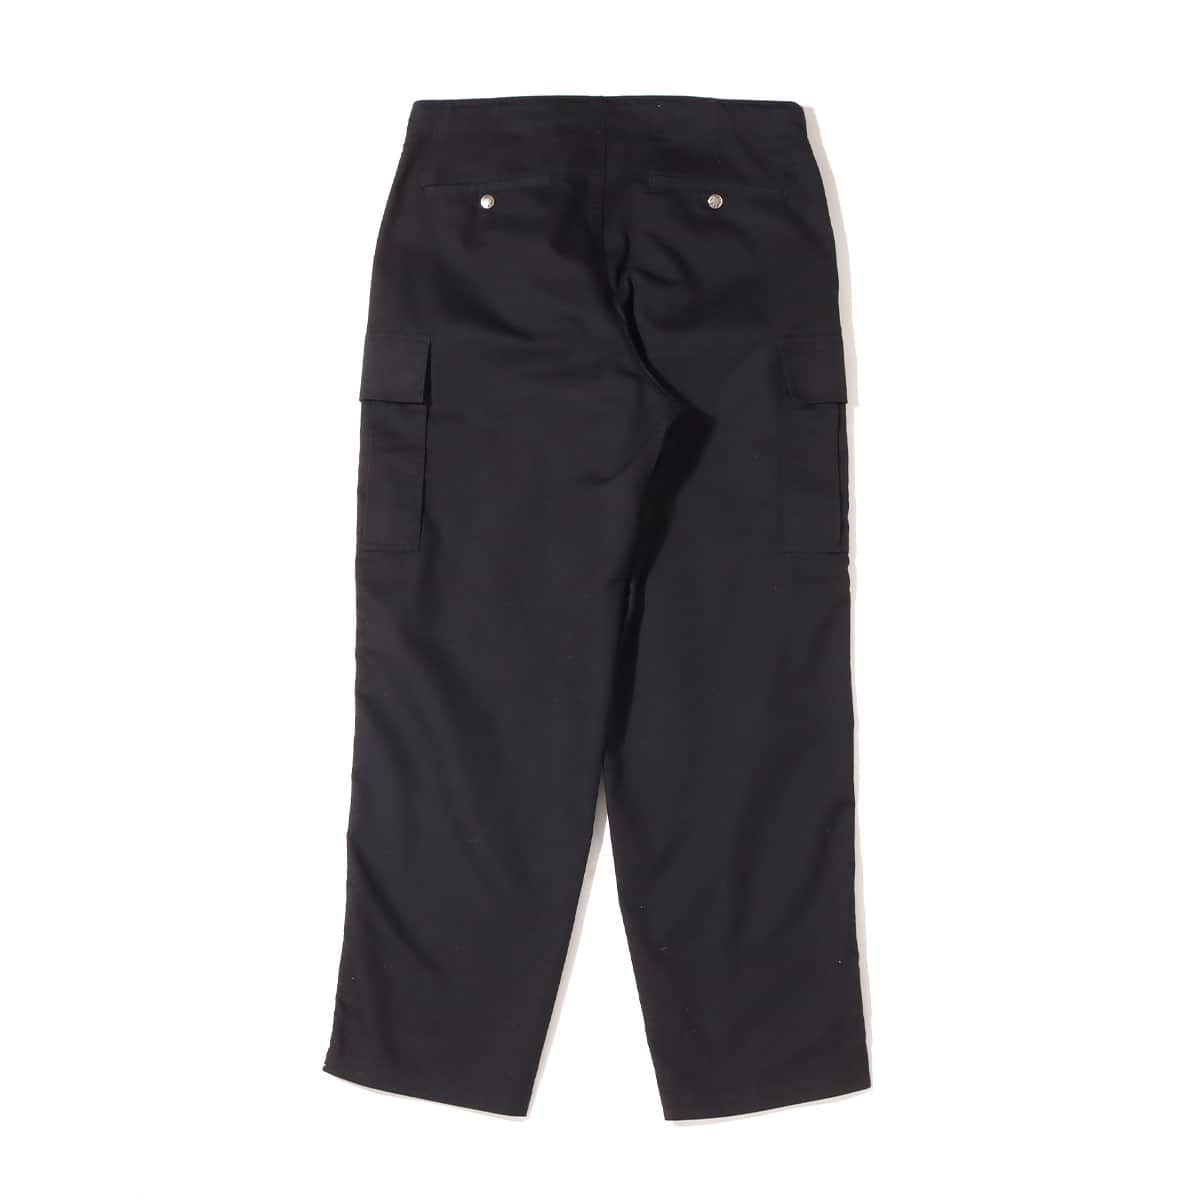 THE NORTH FACE PURPLE LABEL Stretch Twill Cargo Pants BLACK